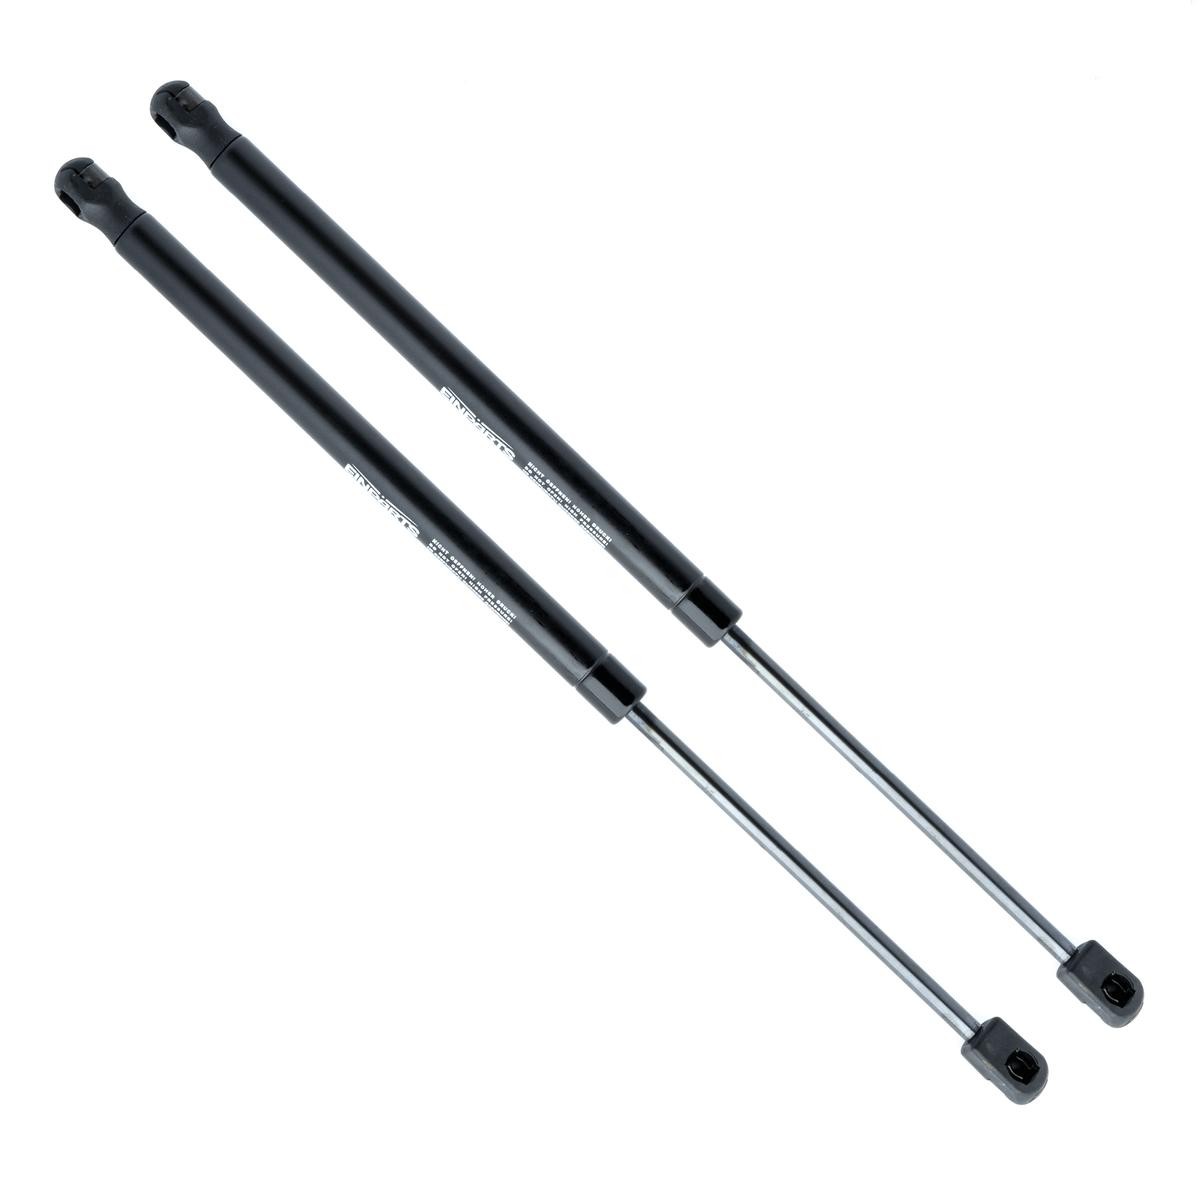 EINPARTS 420N, 445 mm Stroke: 162mm Gas spring, boot- / cargo area EP9132GS buy